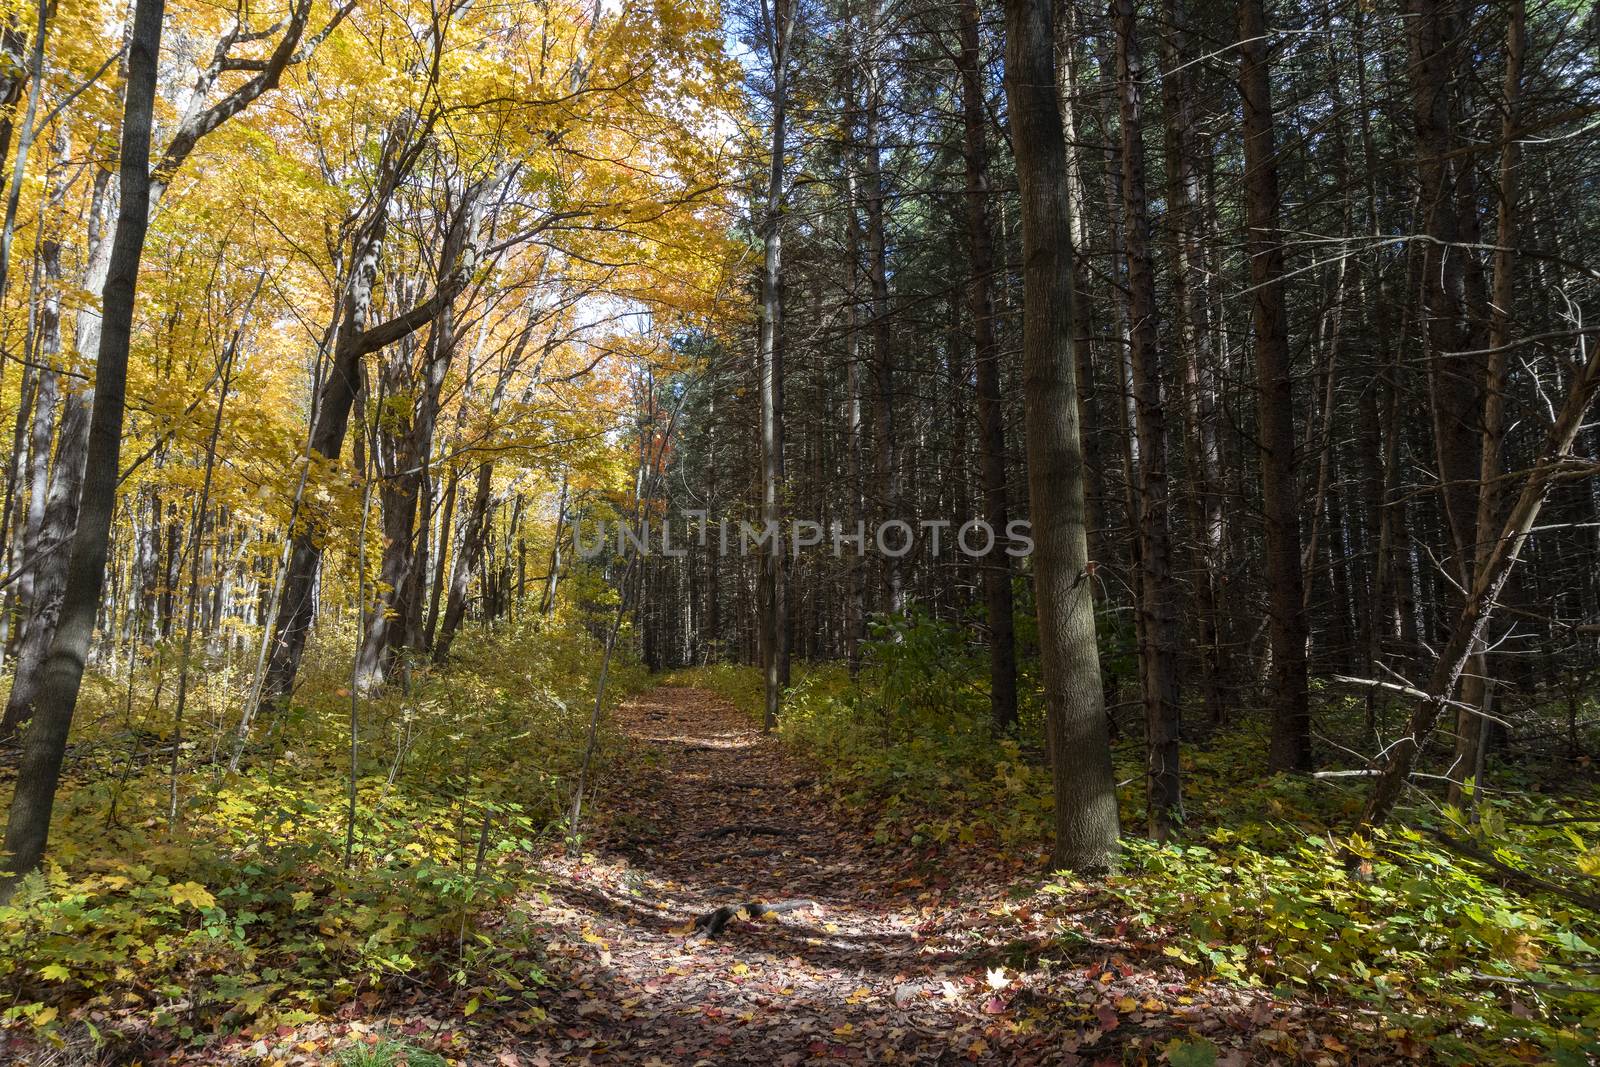  The trail between the maple forest and pine forest by ben44